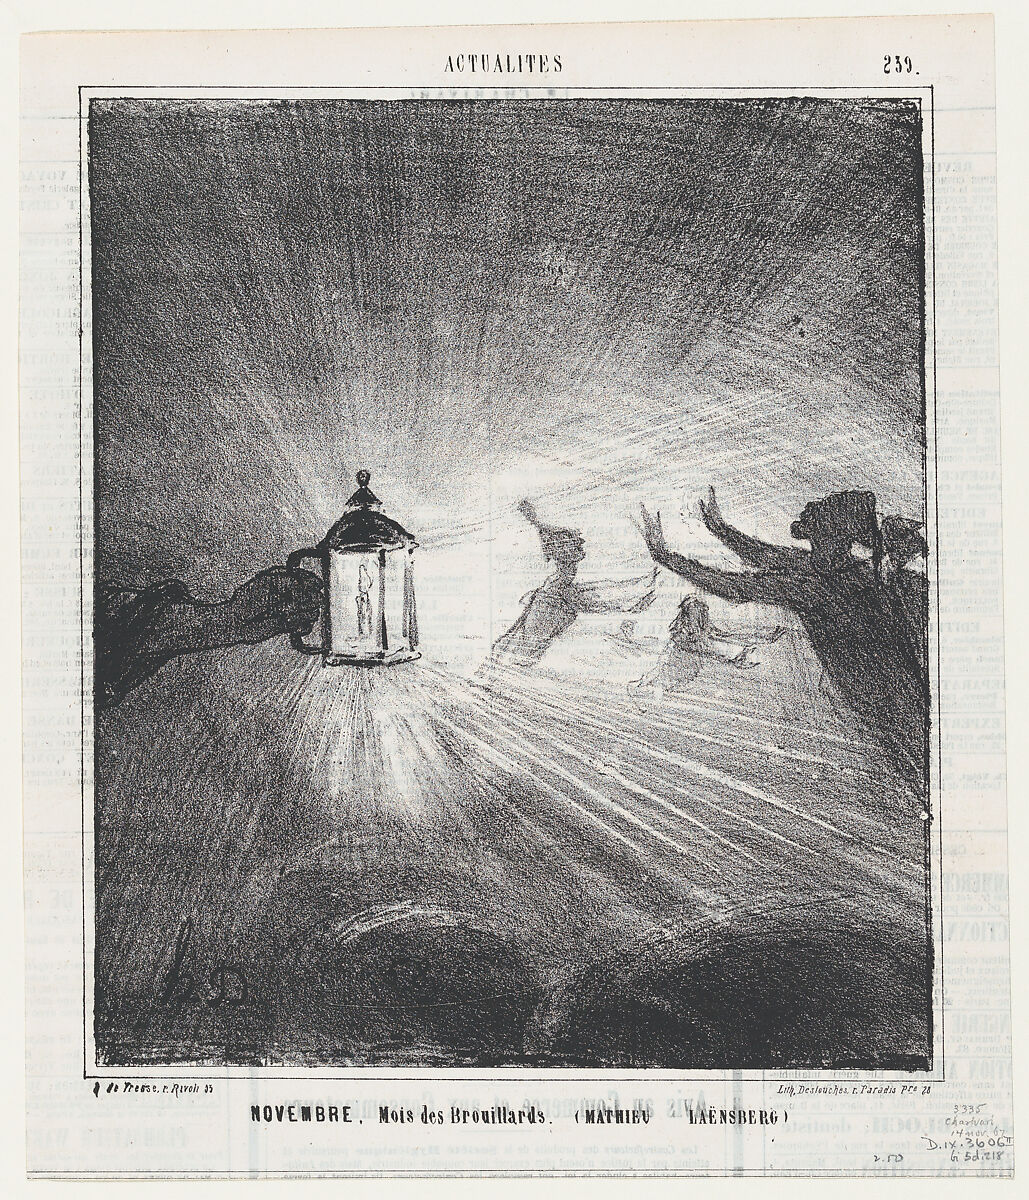 November, month of fog (Matthieu de Laensberg), from 'News of the day,' published in Le Charivari, November 14, 1867, Honoré Daumier (French, Marseilles 1808–1879 Valmondois), Lithograph on newsprint; second state of two (Delteil) 